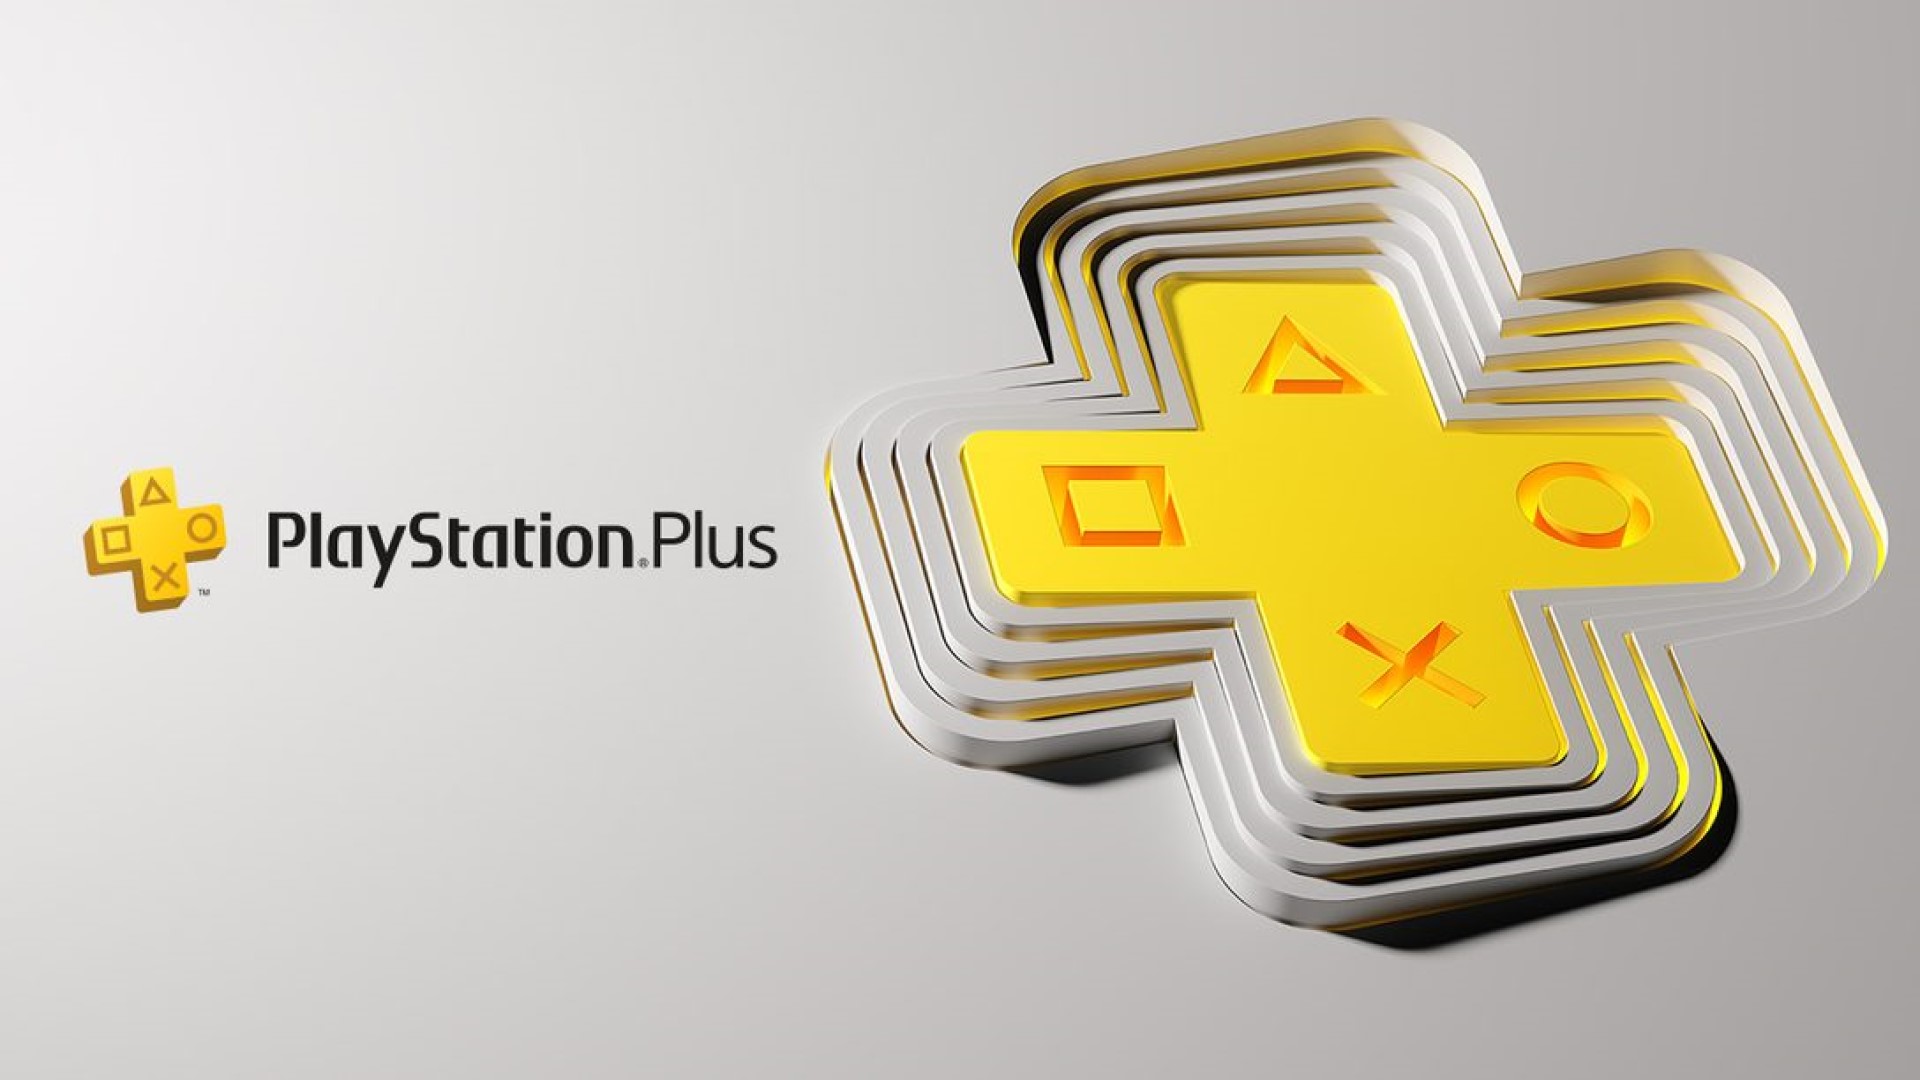 PlayStation Plus 12-Month Subscription Prices Are Increasing Starting September 6